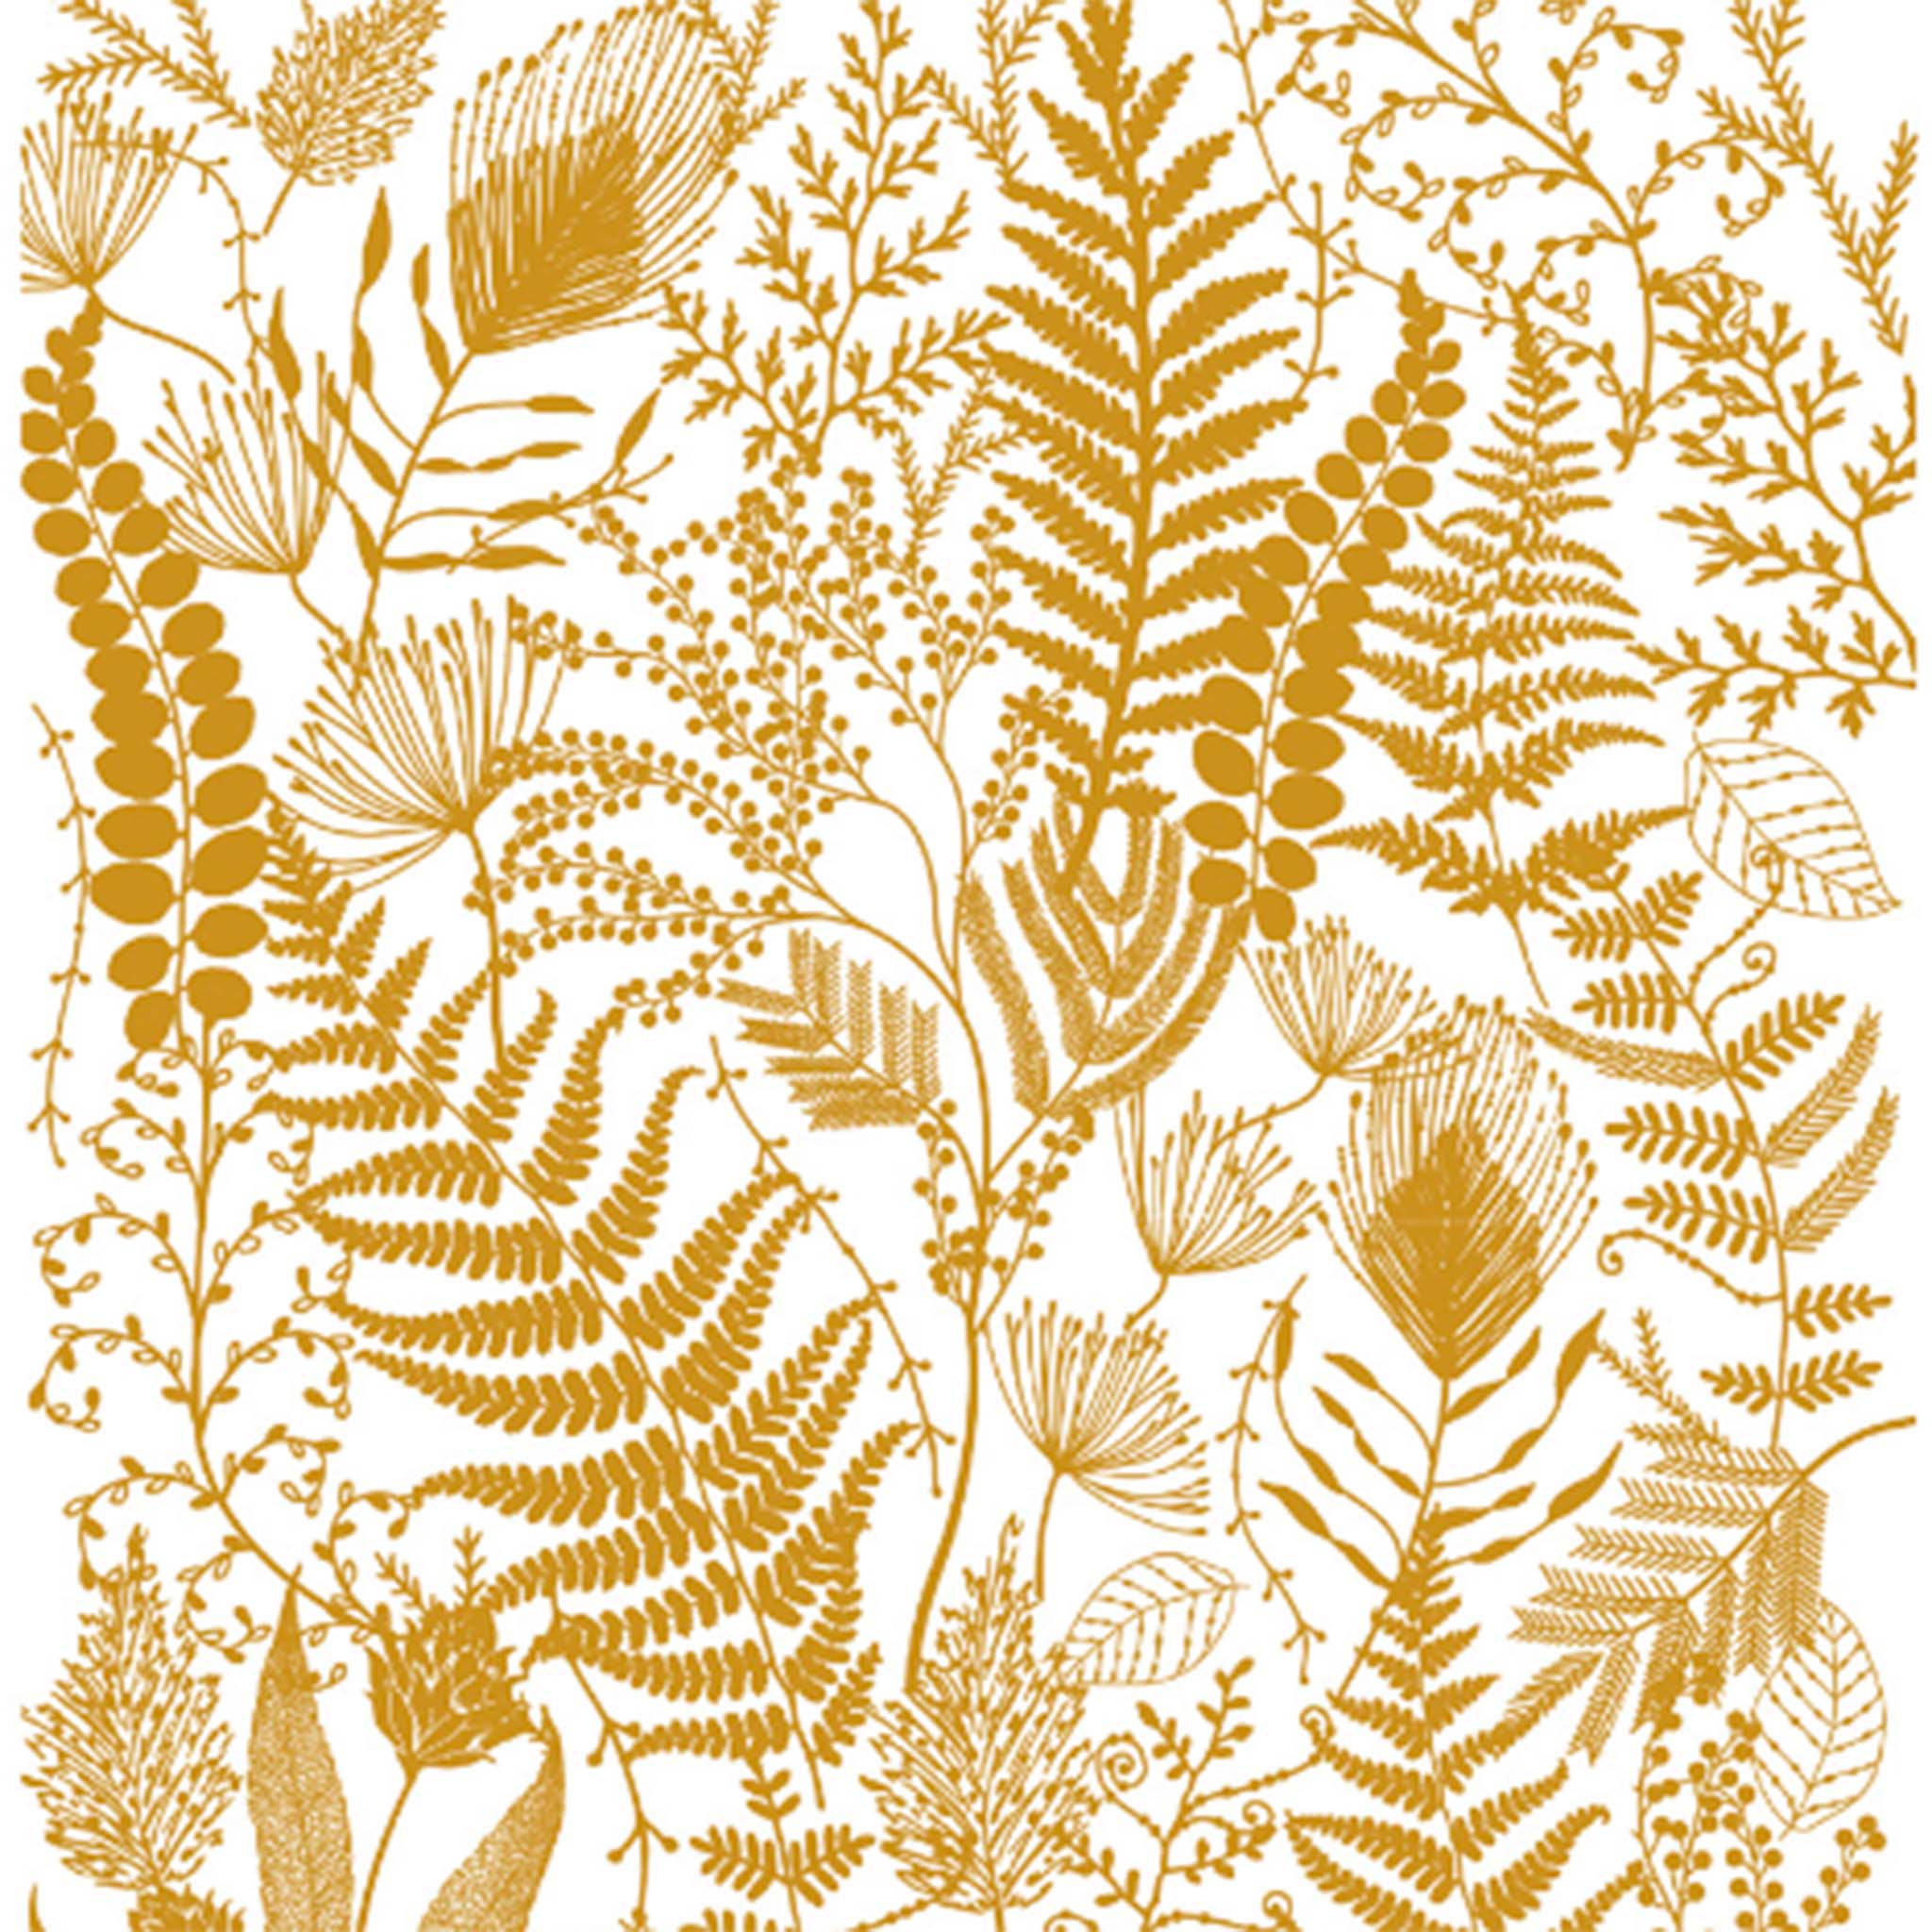 A close-up of rub-on furniture transfer against a white background features delicate ferns and petite floral sprigs in gold foil.